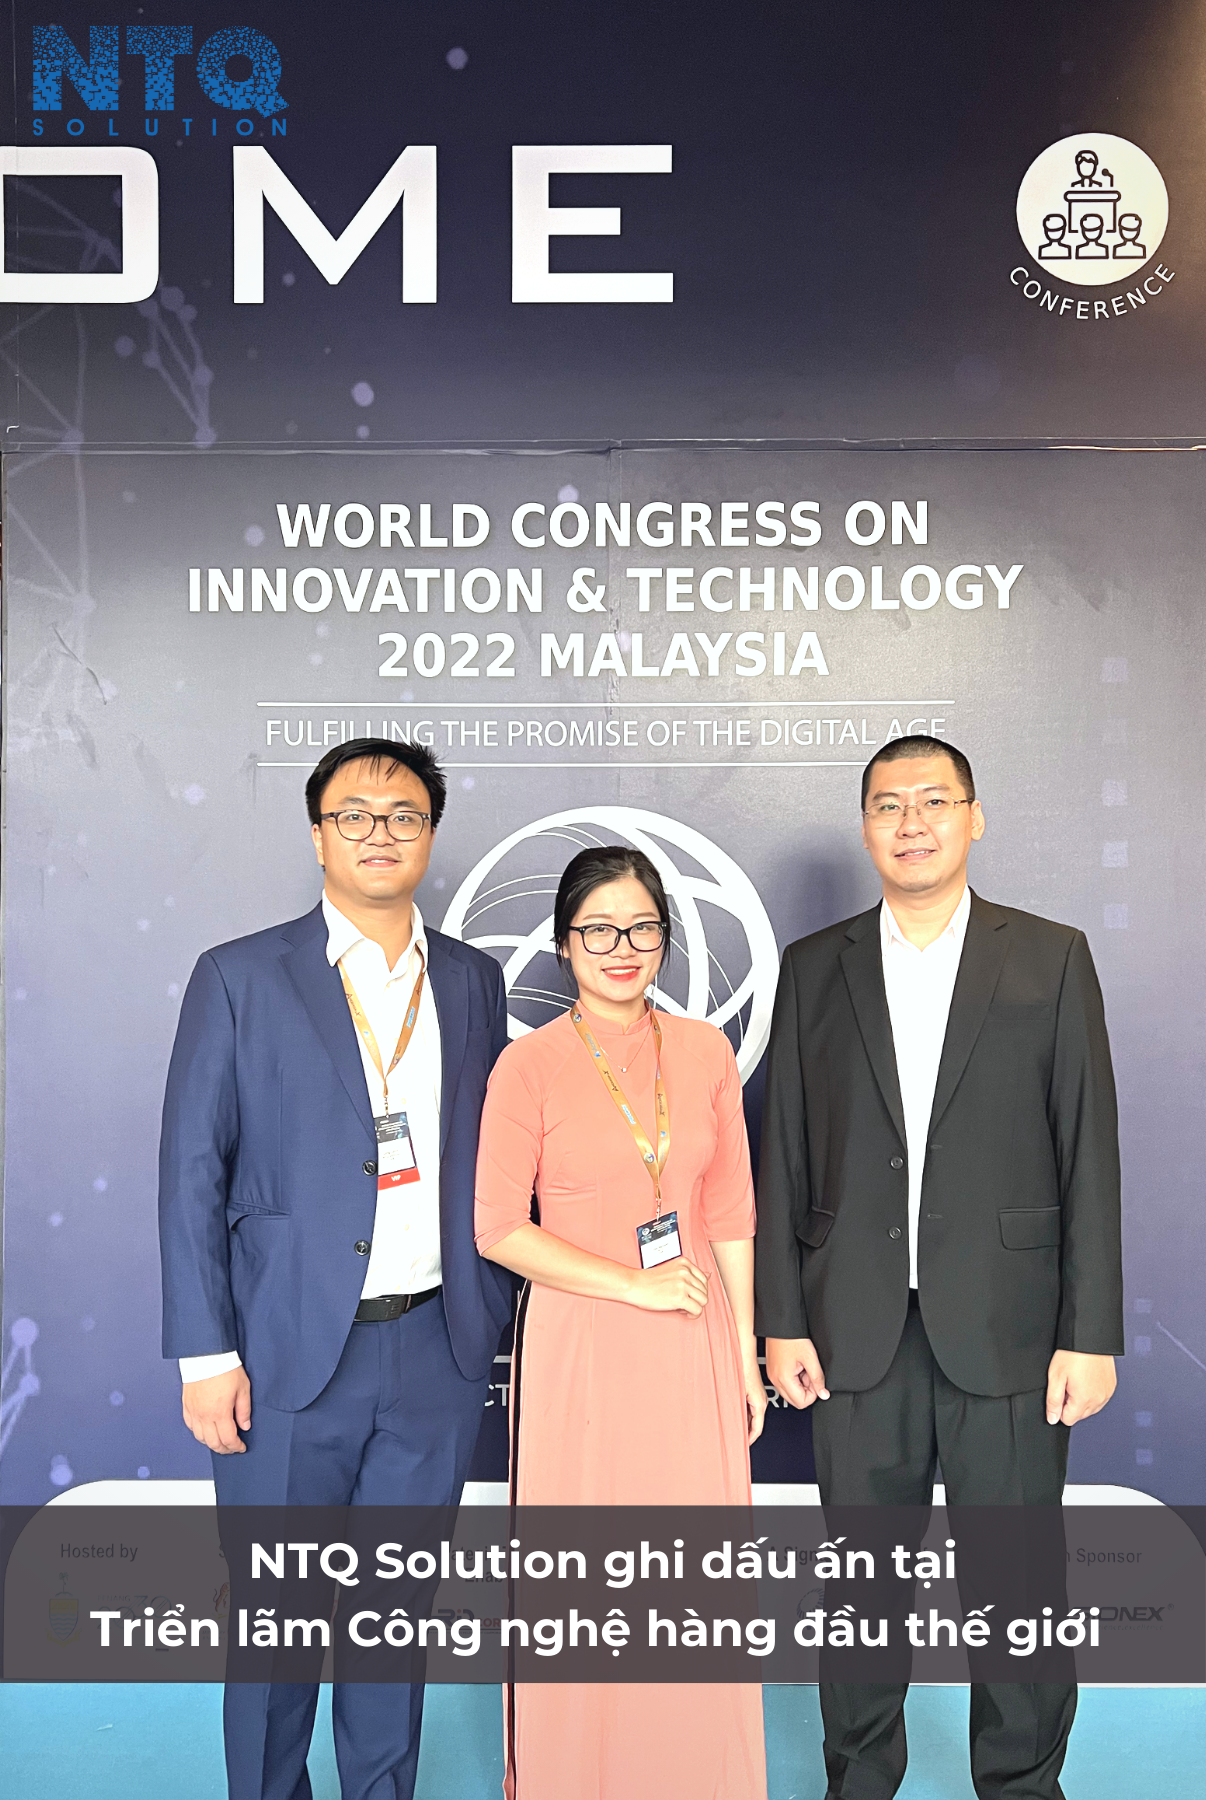 NTQ Solution Made An Impressive Mark At The Leading Technology Exhibition Worldwide 